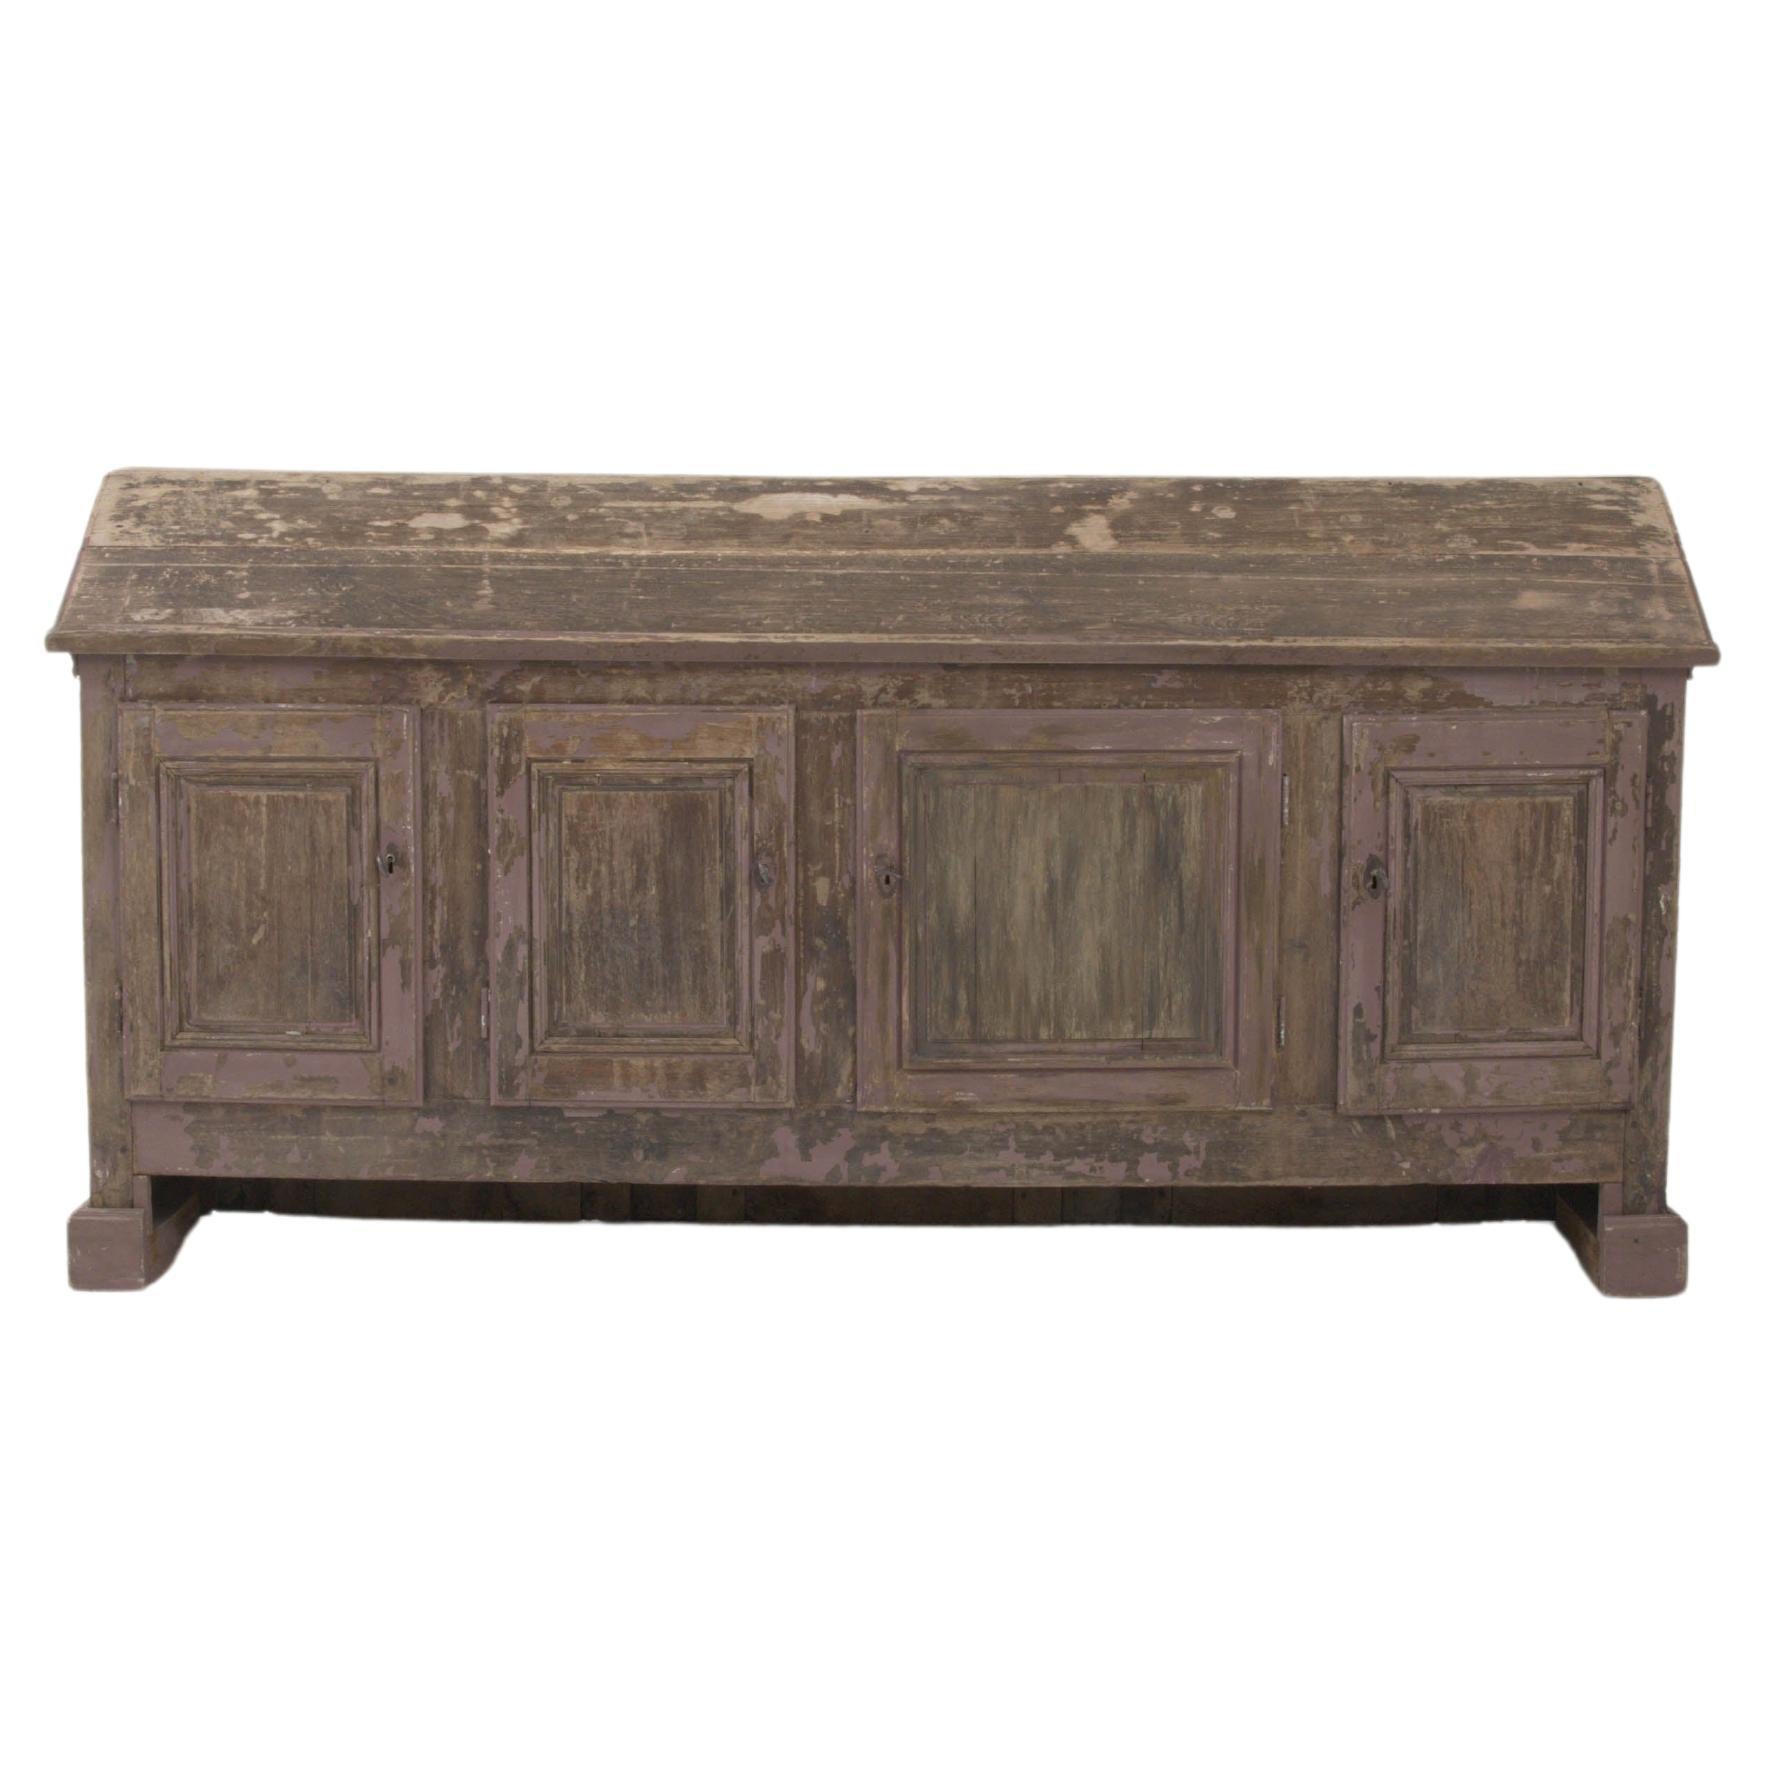 Early 19th Century French Wood Patinated Buffet